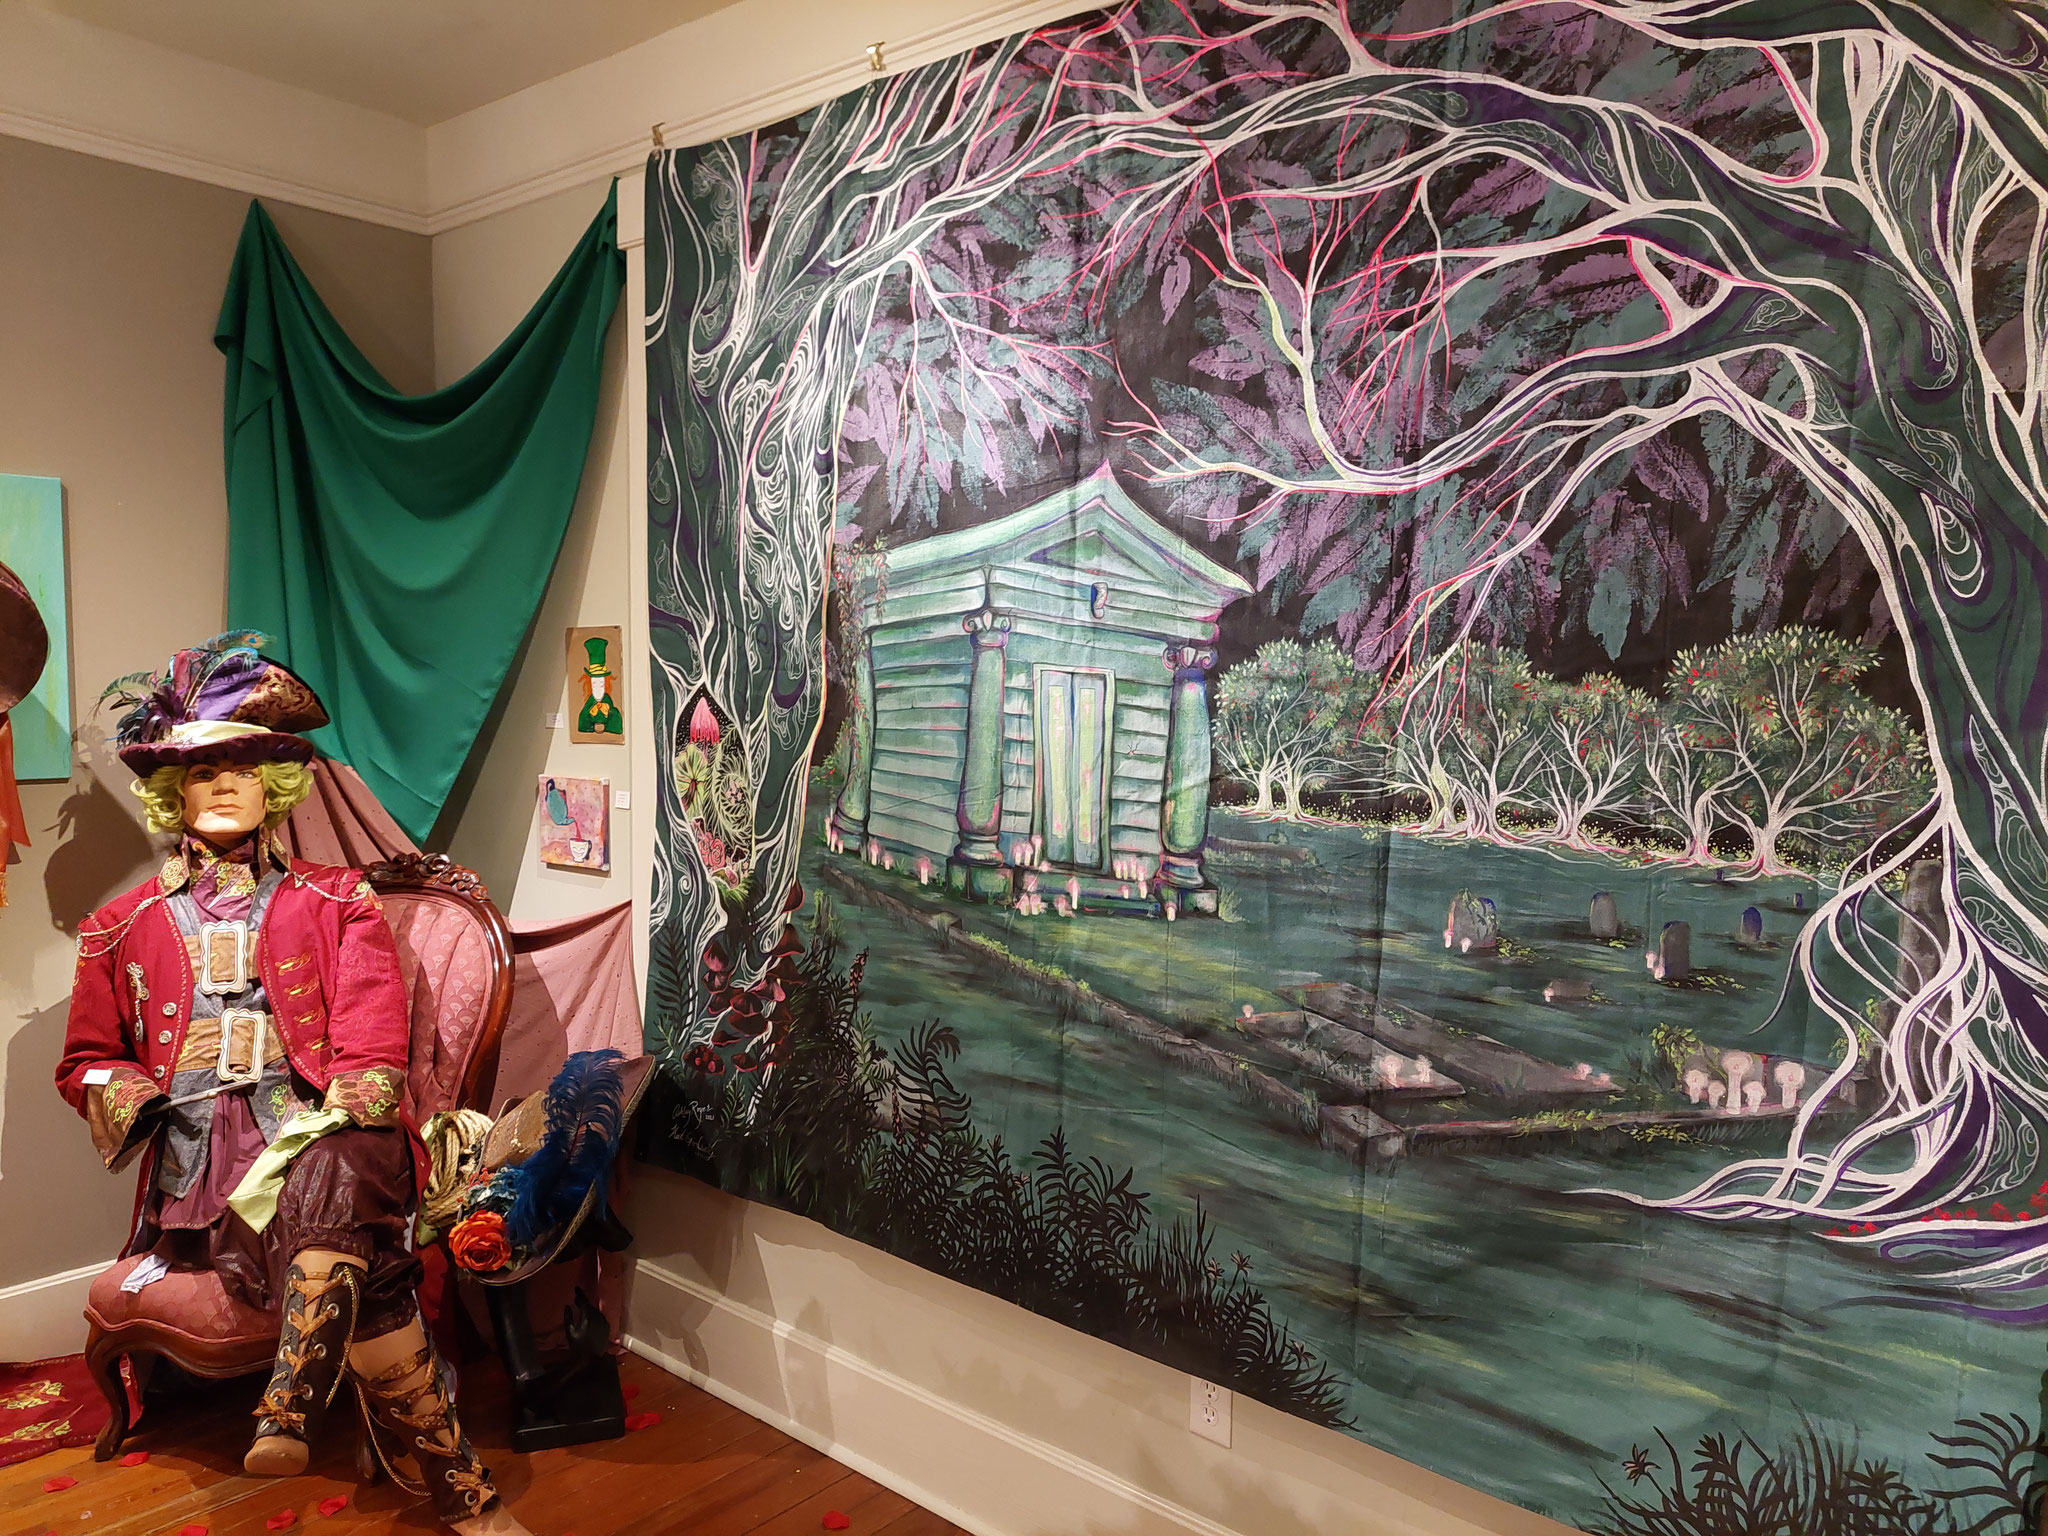 Mural by Ashley Royer and Kat Godsey, Mad Hatter by Jessy Gillespie